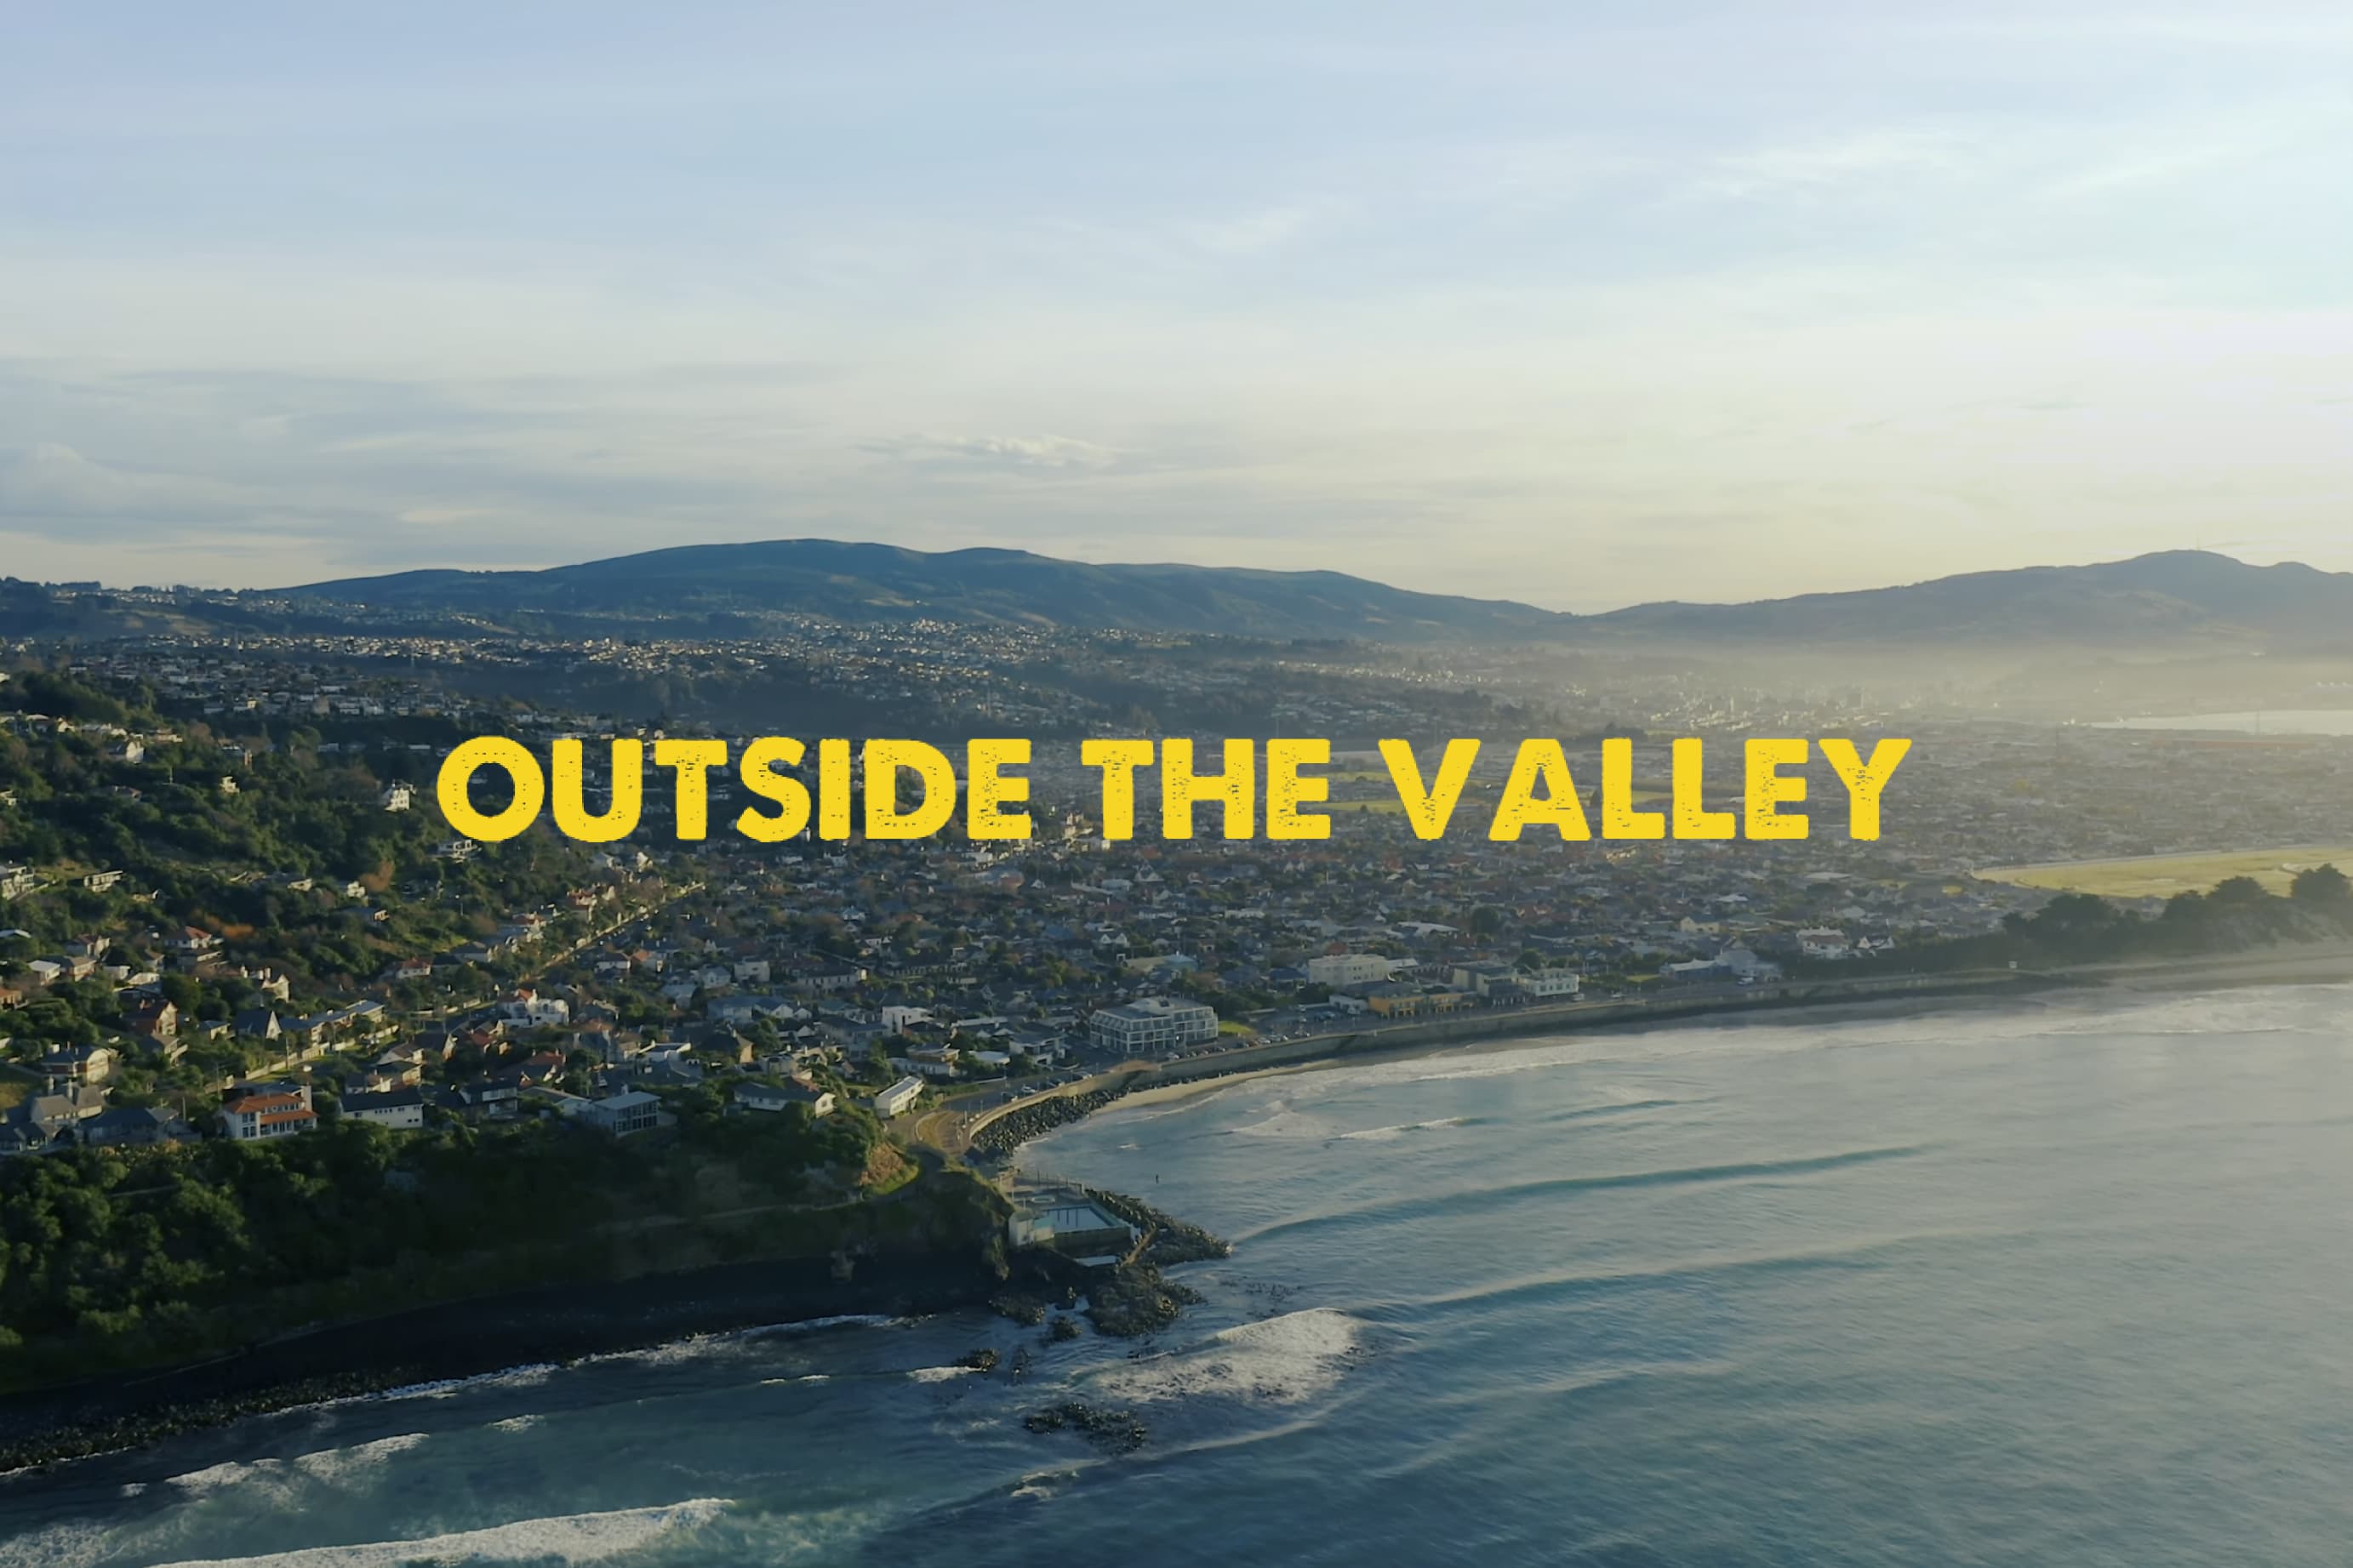 Outside the valley movie logo over a drone photo of Dunedin